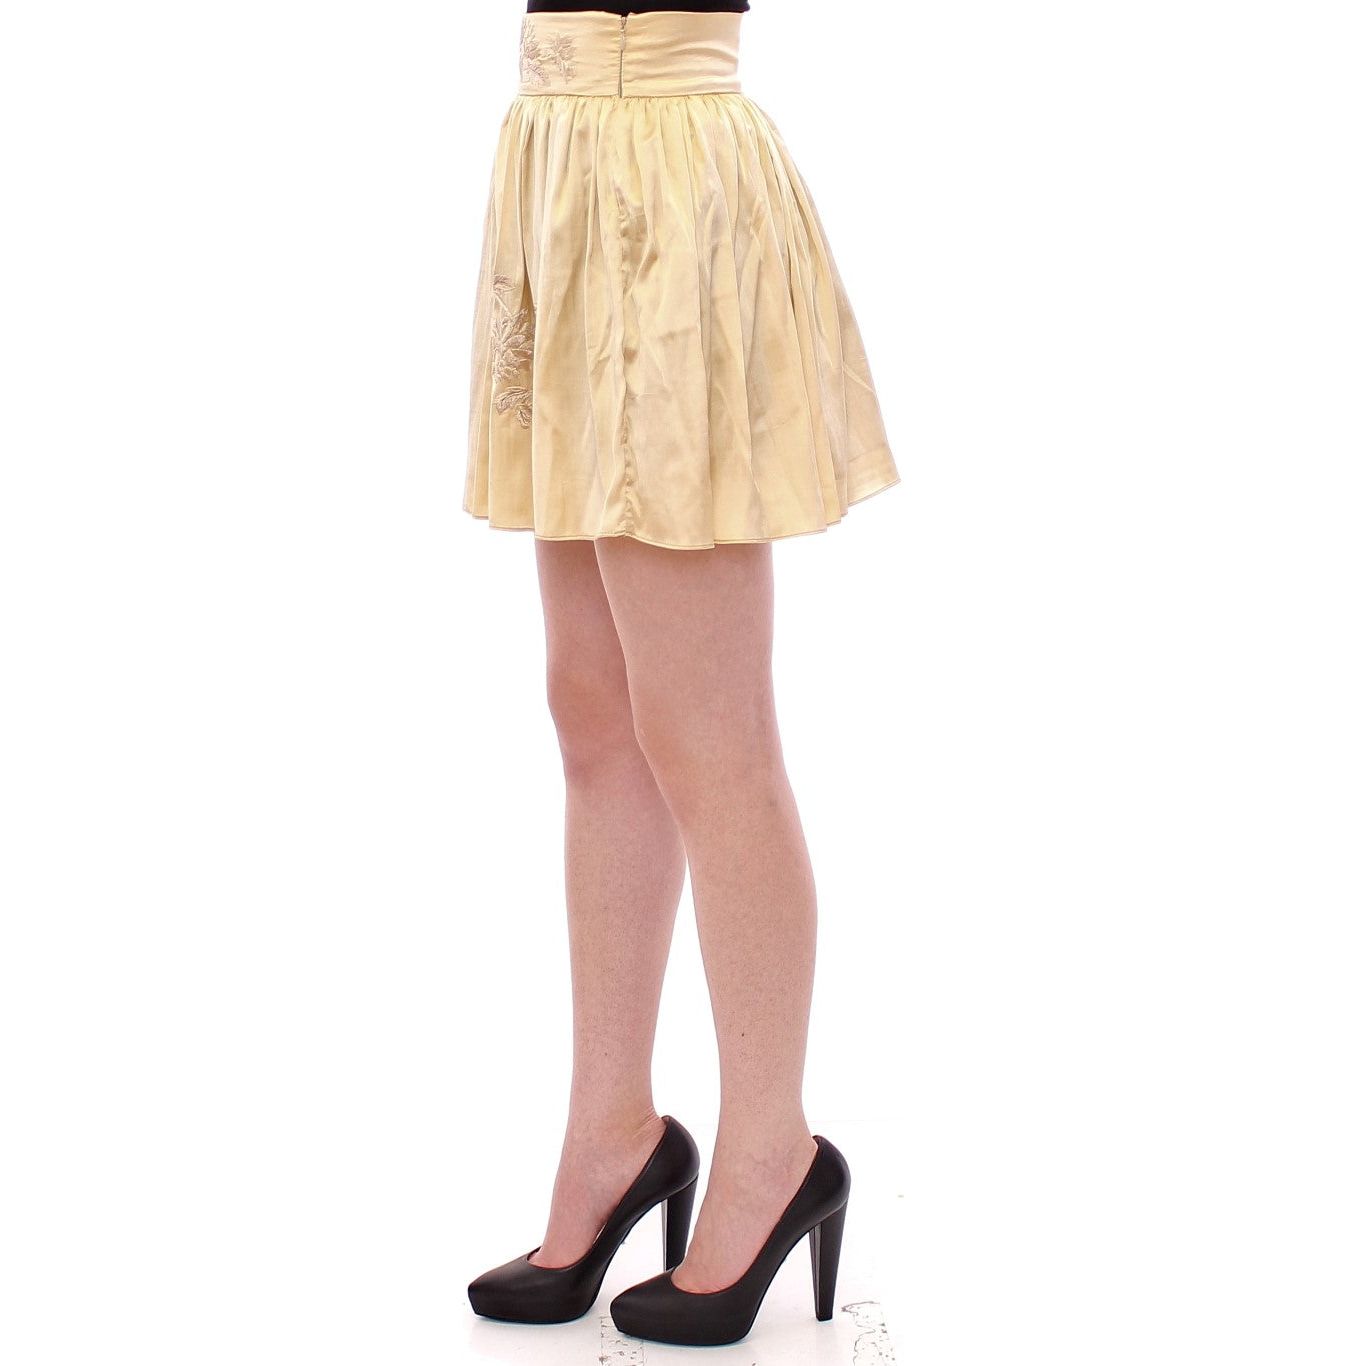 Andrea Incontri Chic Beige Floral Embroidered Mini Skirt beige-floral-embroidery-mini-skirt